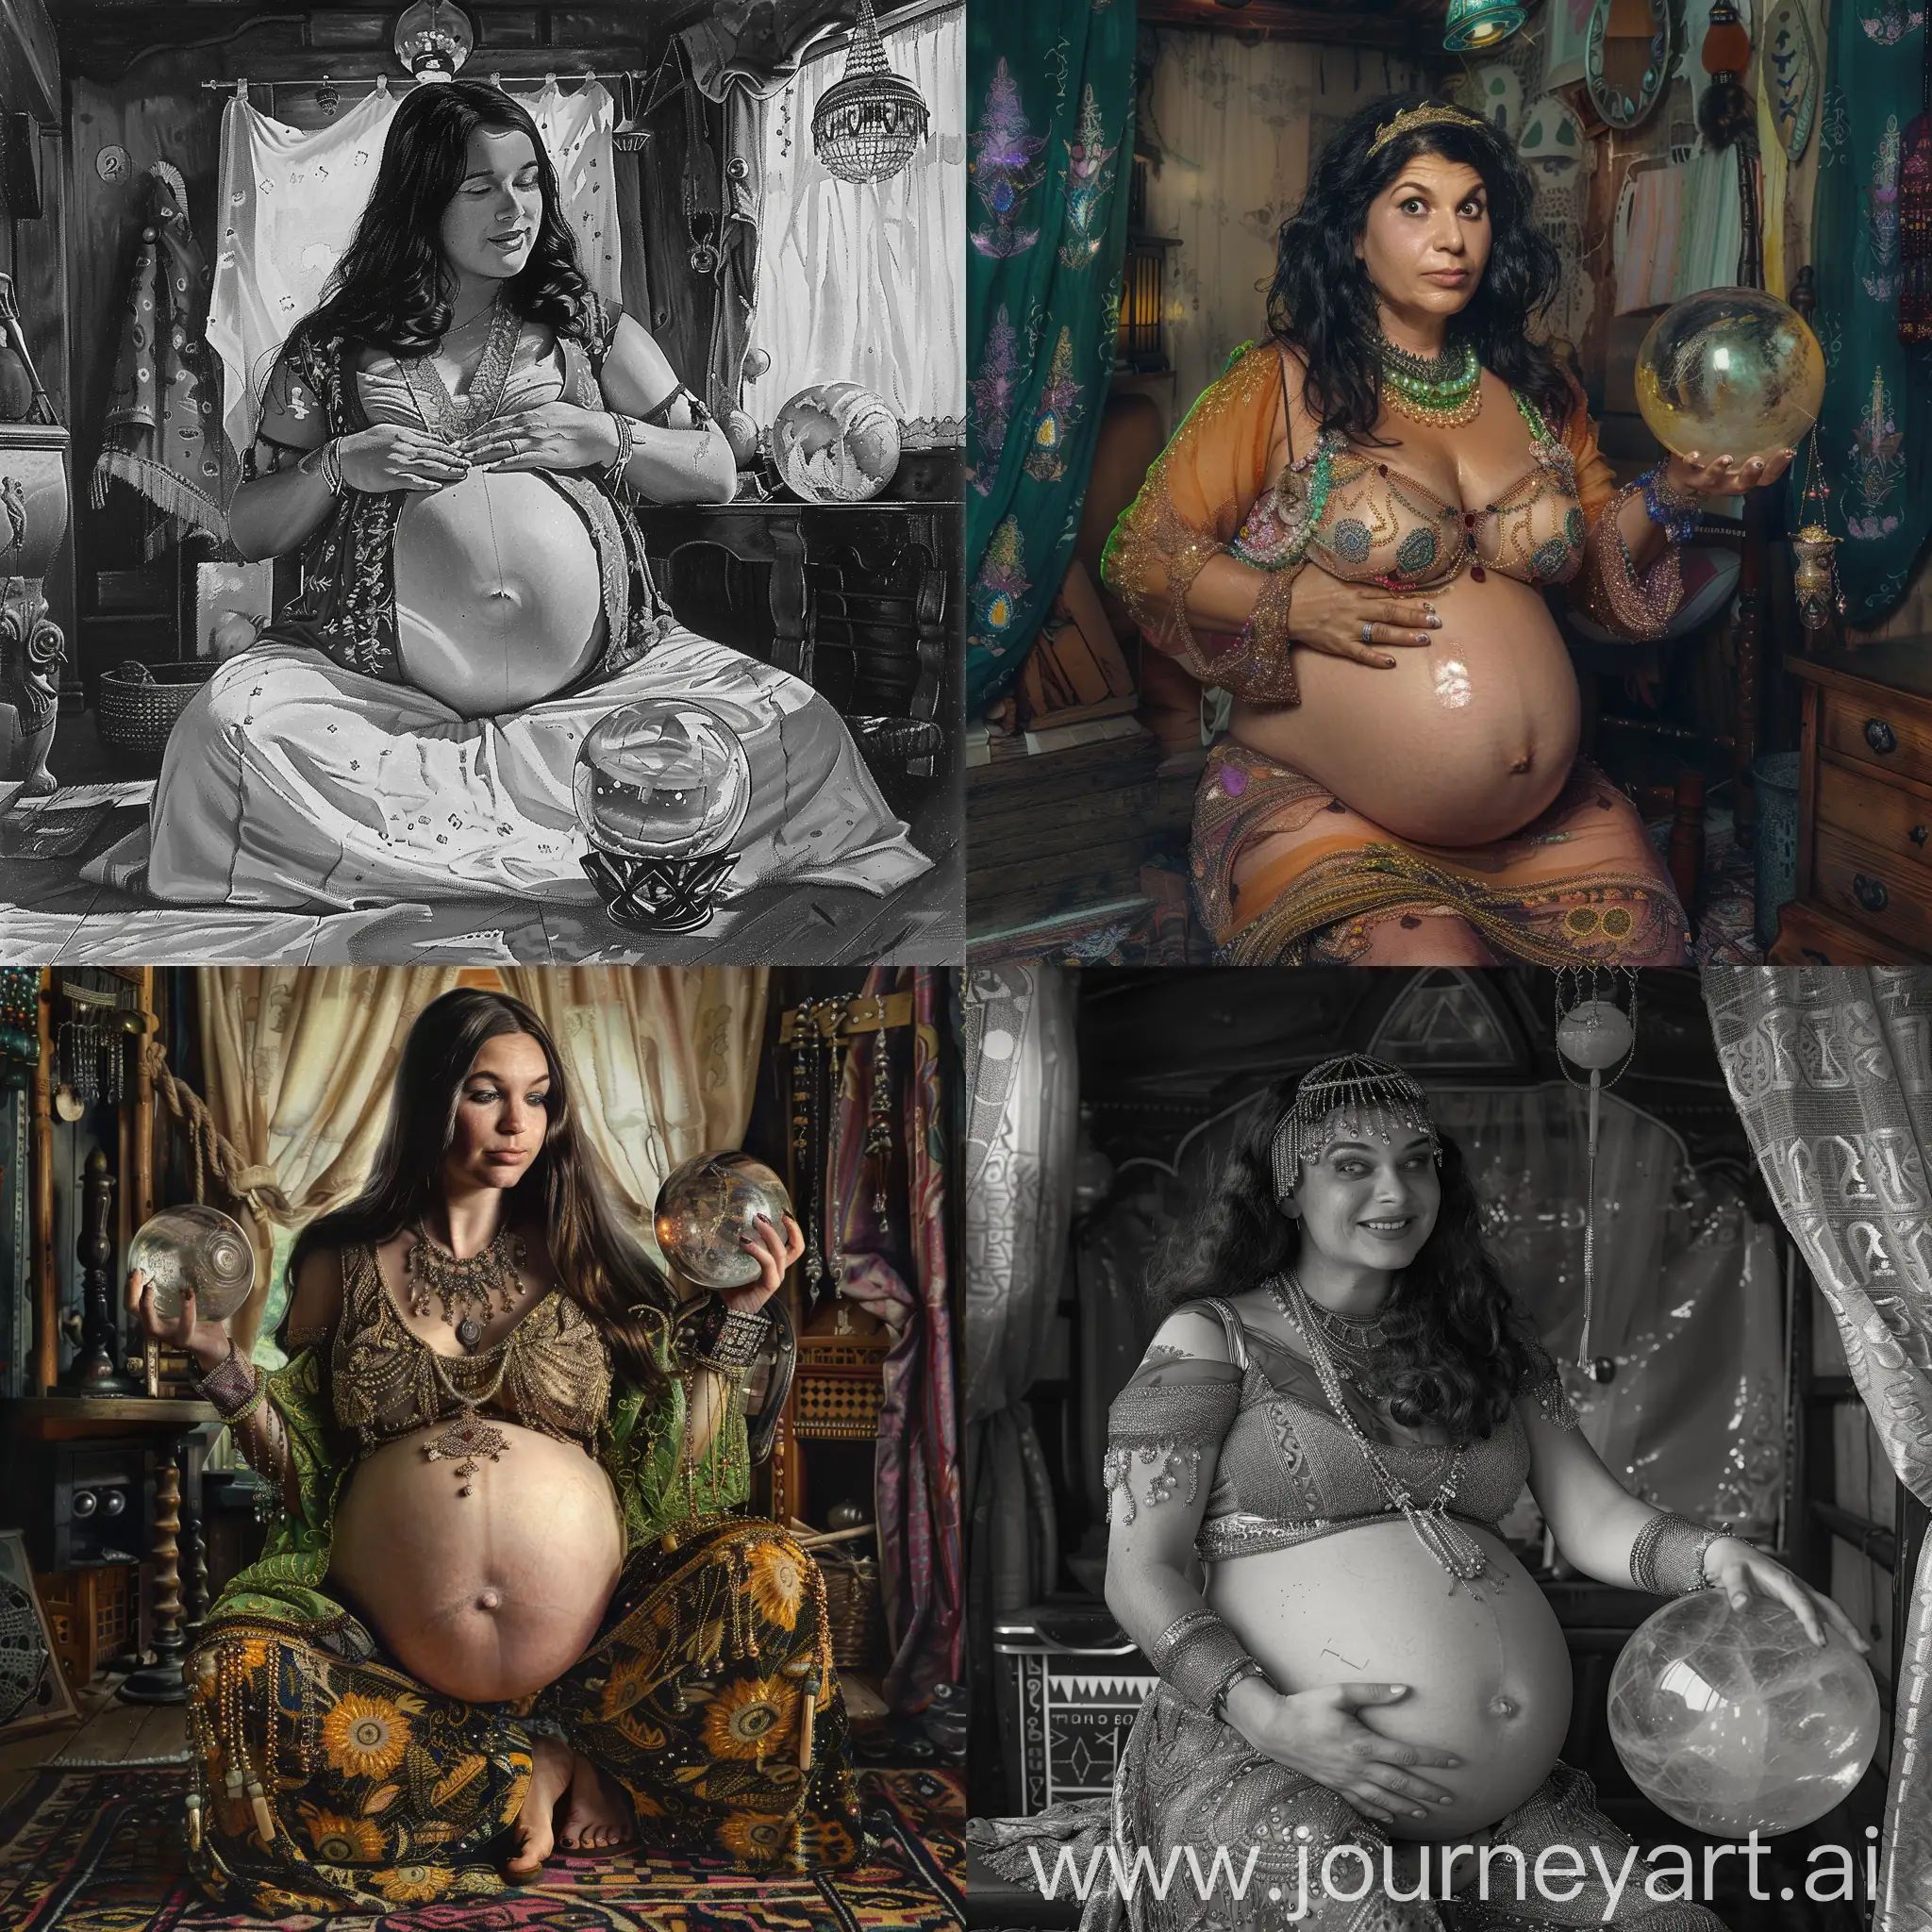 Madam Irina: The 28 year old Romanian Born Fortune Teller. She resides in her cabin with her Crystal Ball. She's very pregnant, Her pregnant belly is so very large. Bare Pregnant belly.